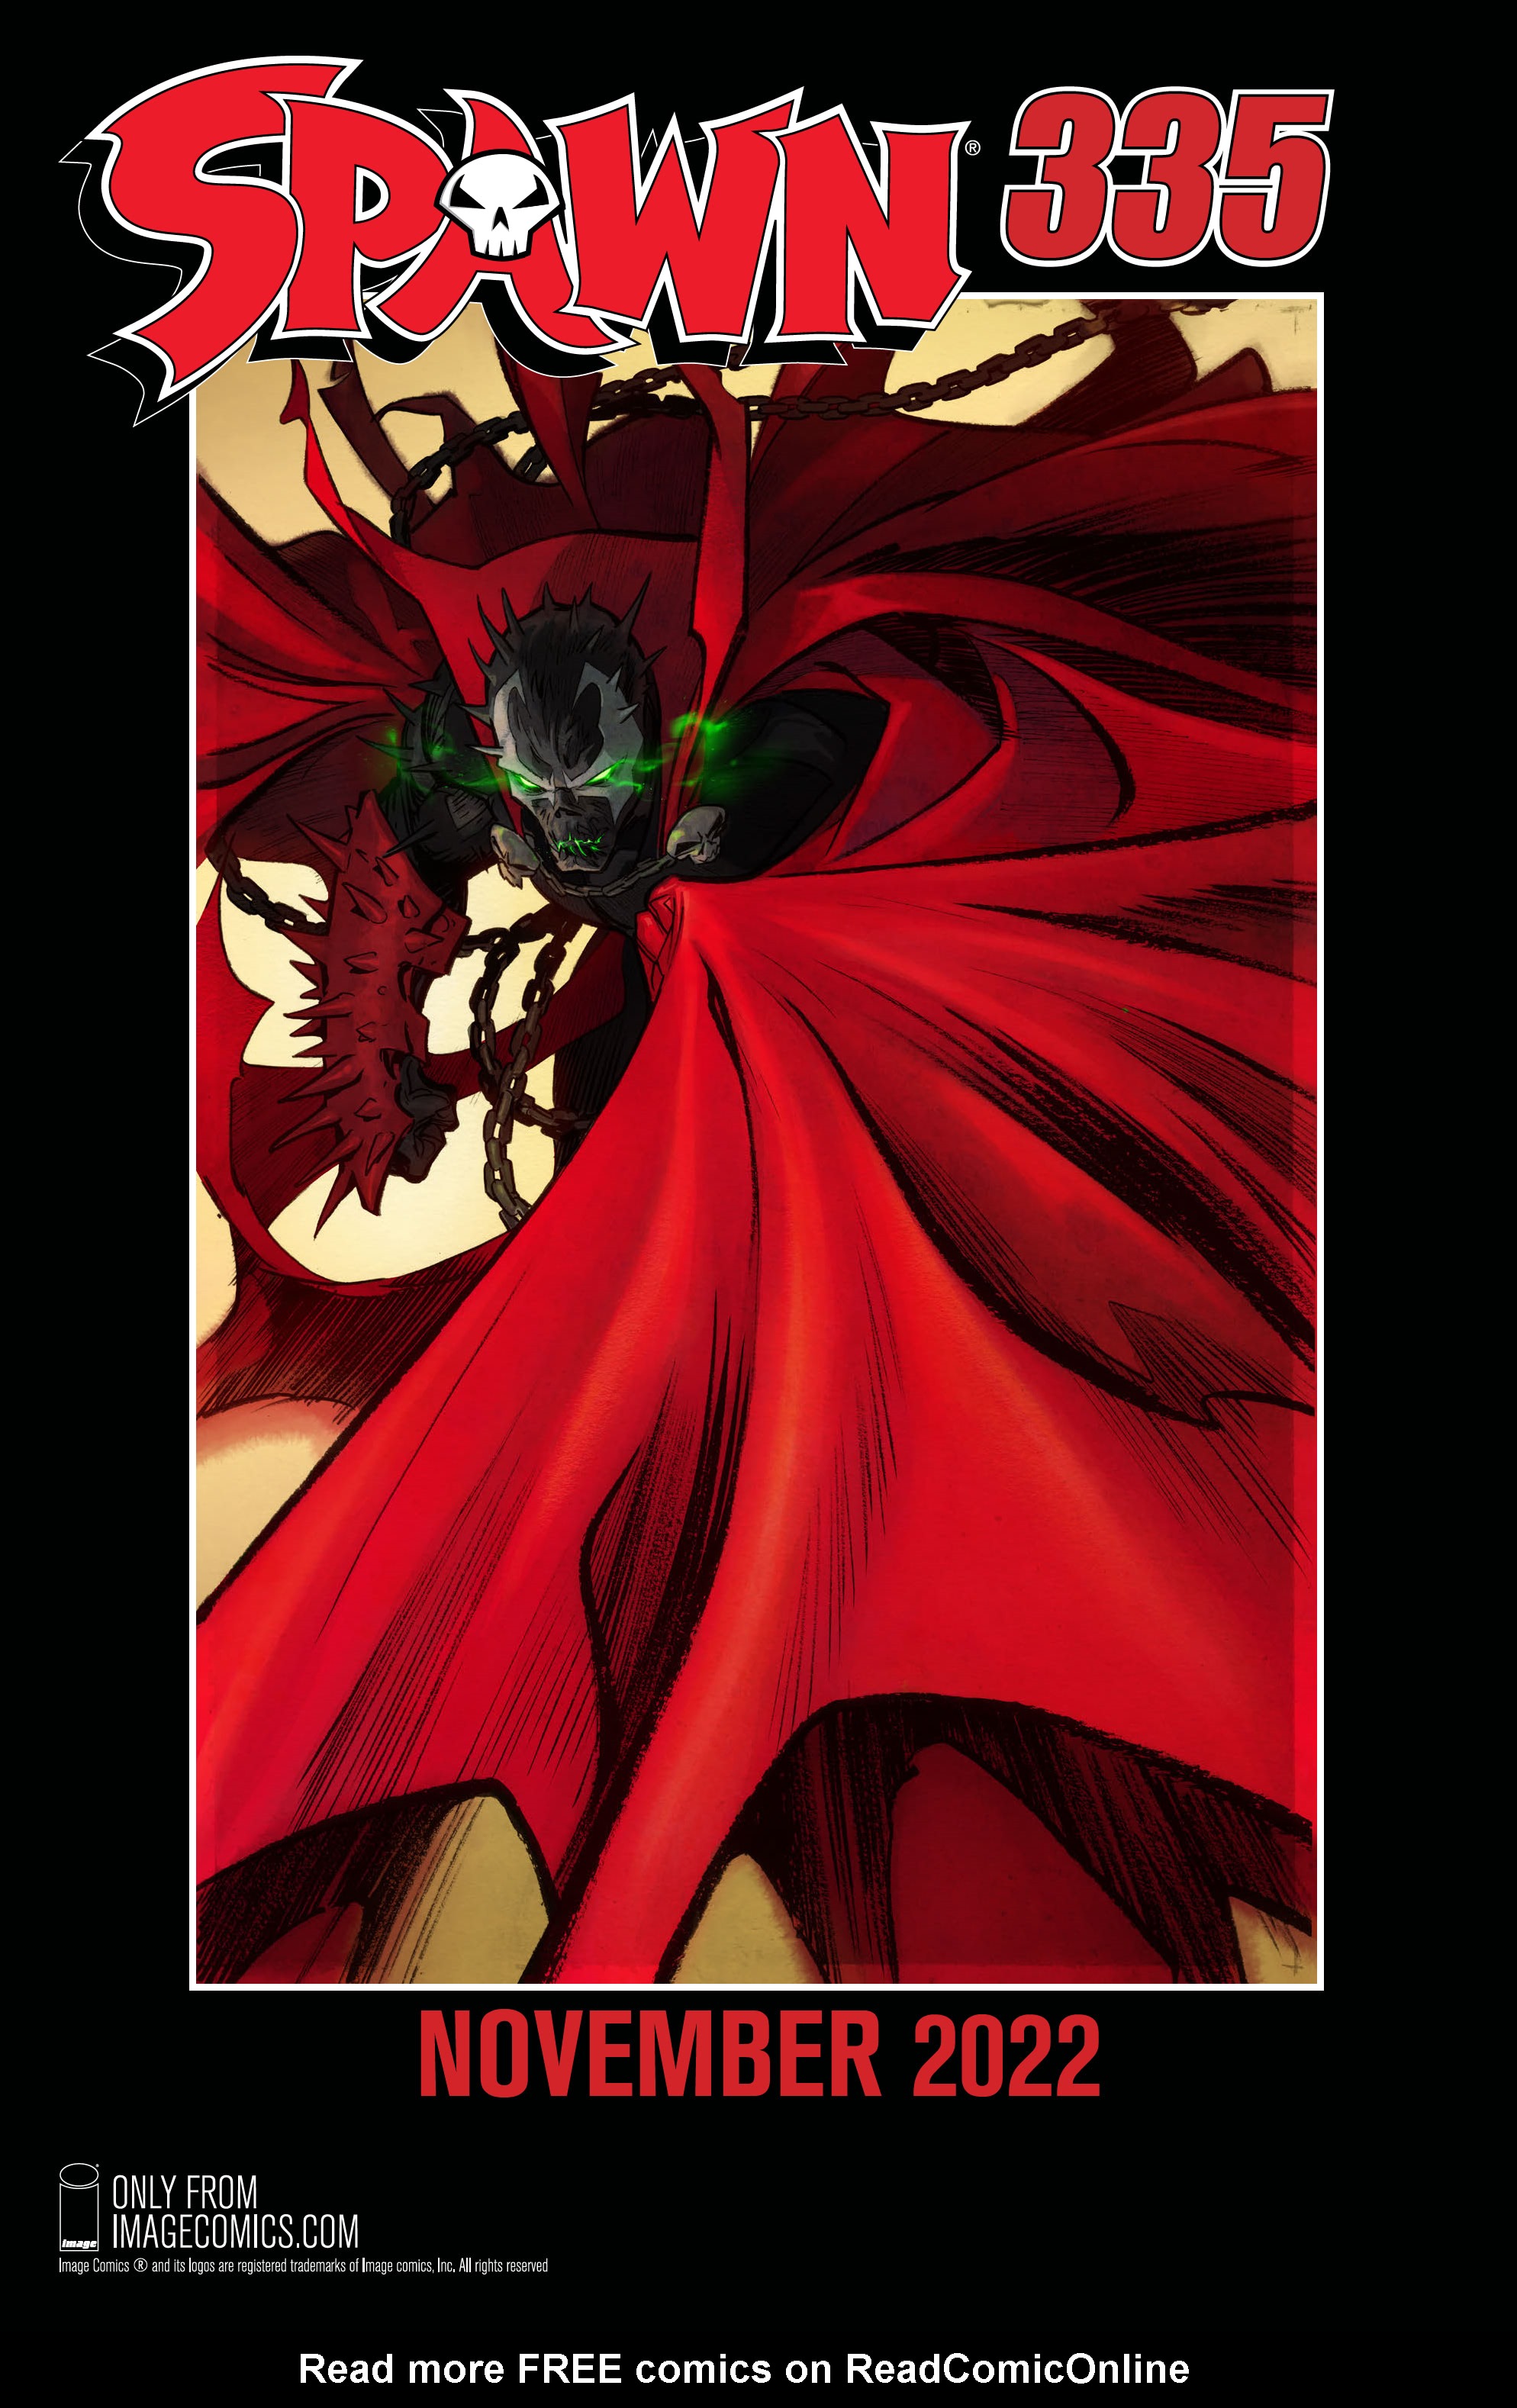 Read online Spawn comic -  Issue #334 - 28